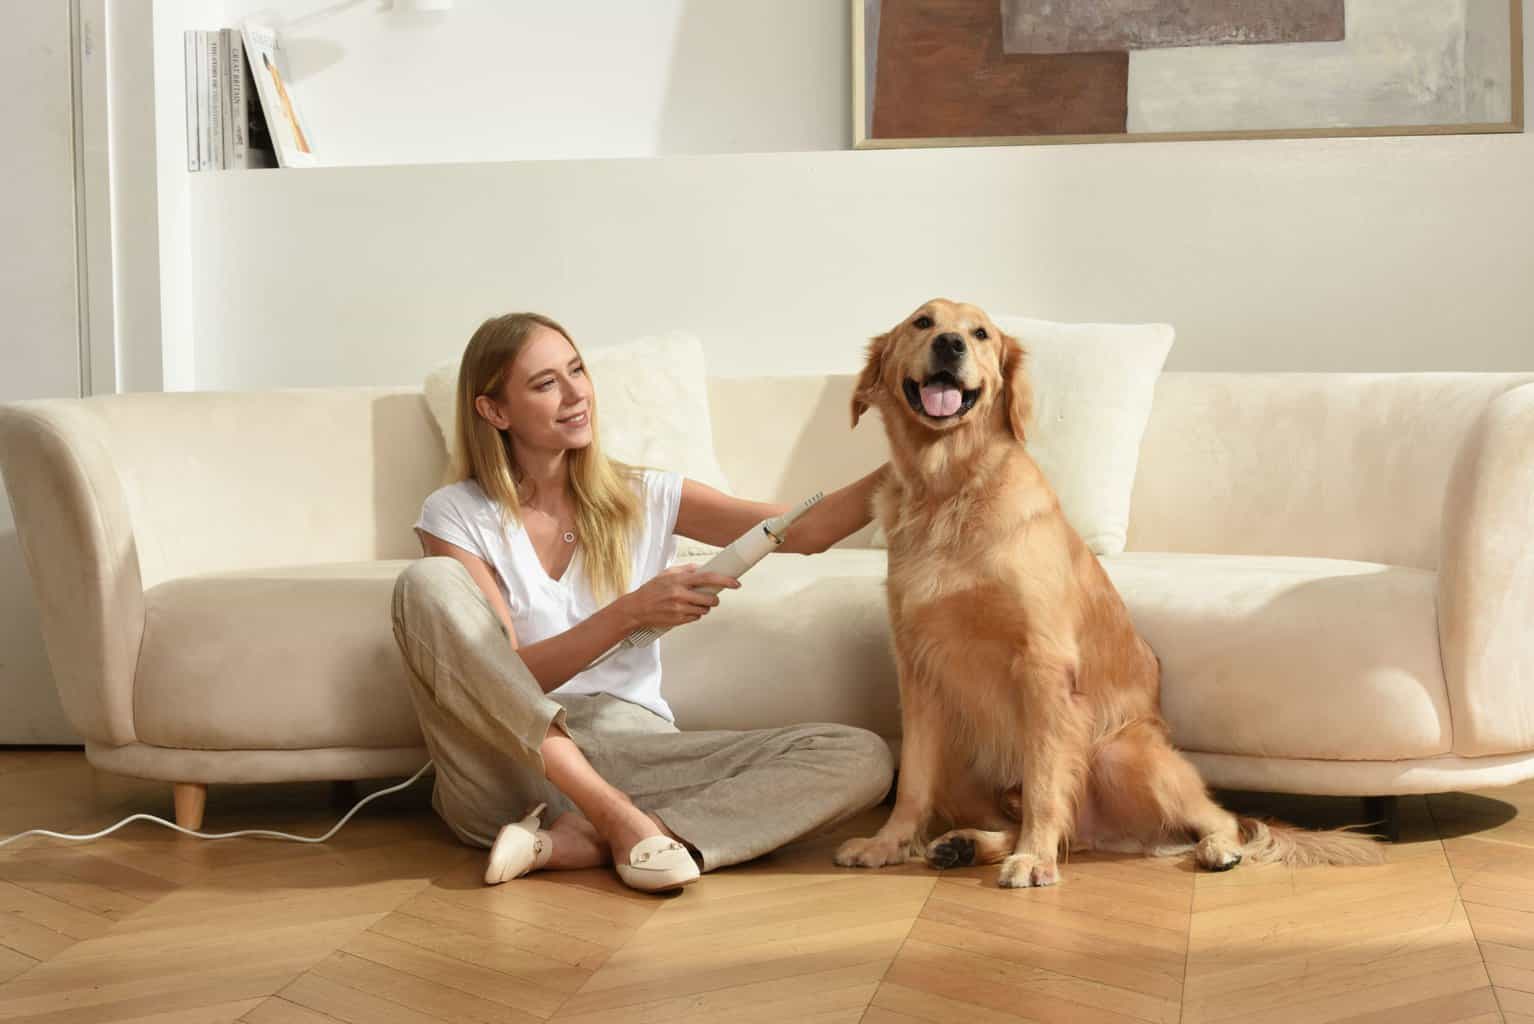 Woman uses Uahpet Fluffy pet dryer on a Golden Retriever. Using pet hair dryers dramatically reduces drying time for fluffy dogs like Golden Retrievers from hours to 25 to 40 minutes.